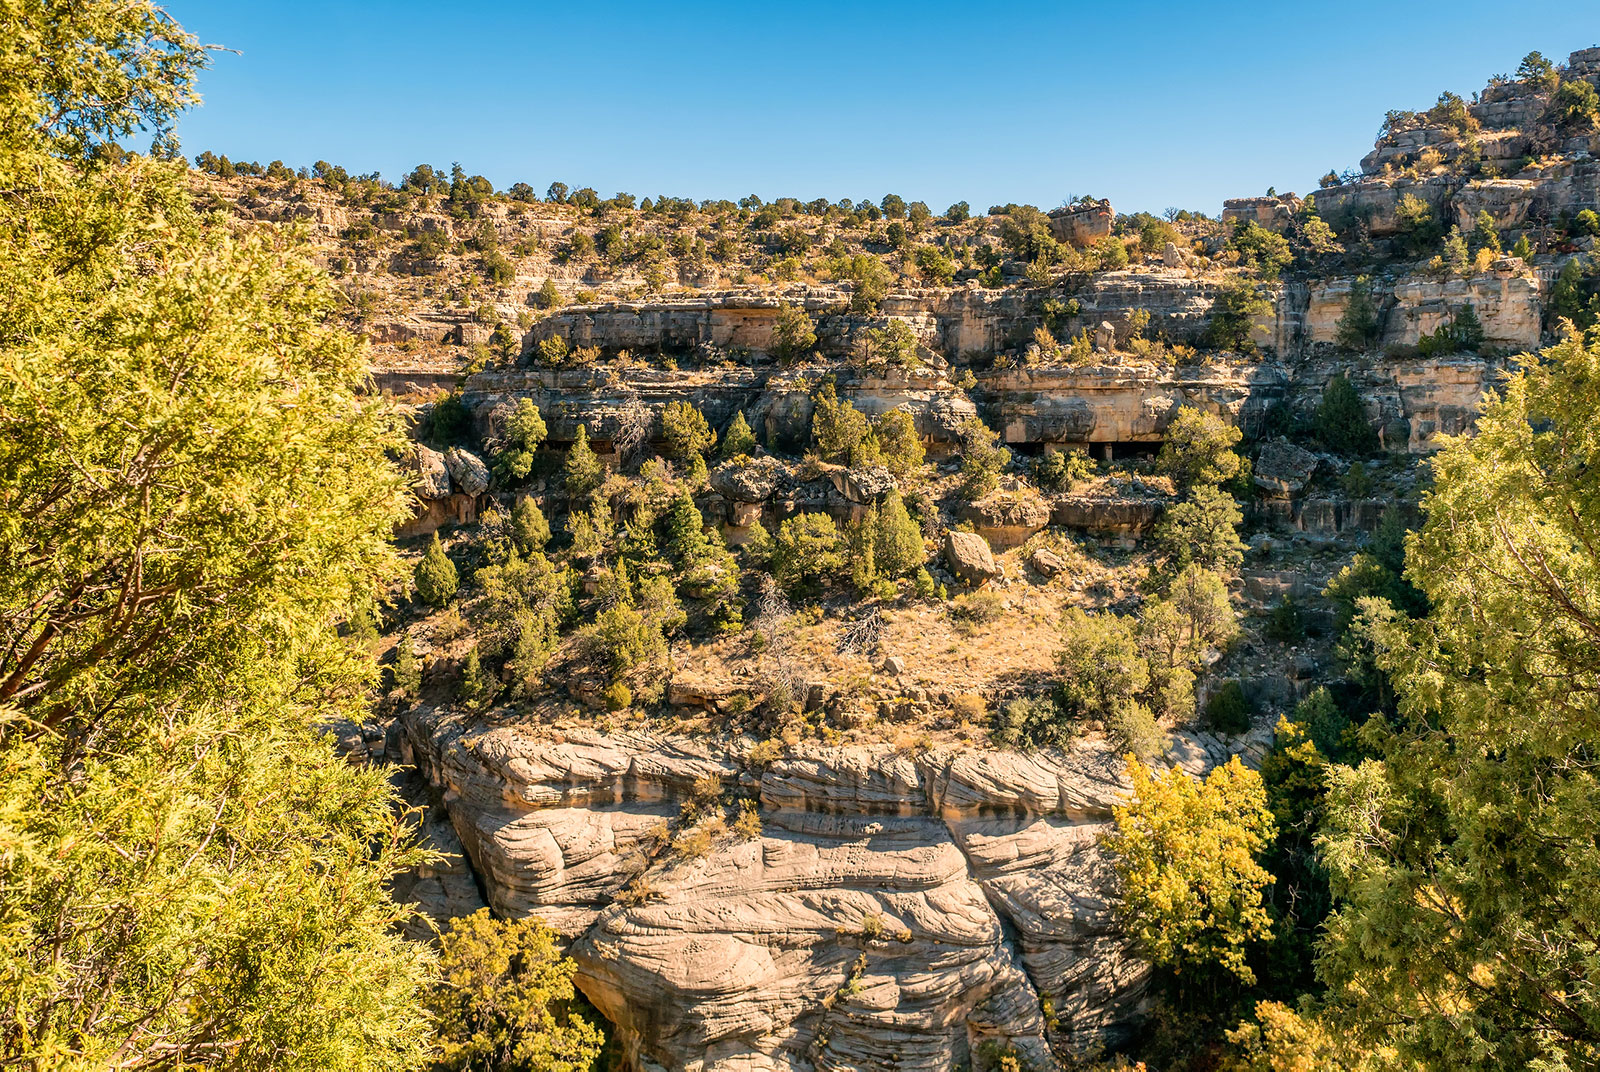 View across to the cliff dwellings at Walnut Canyon National Monument